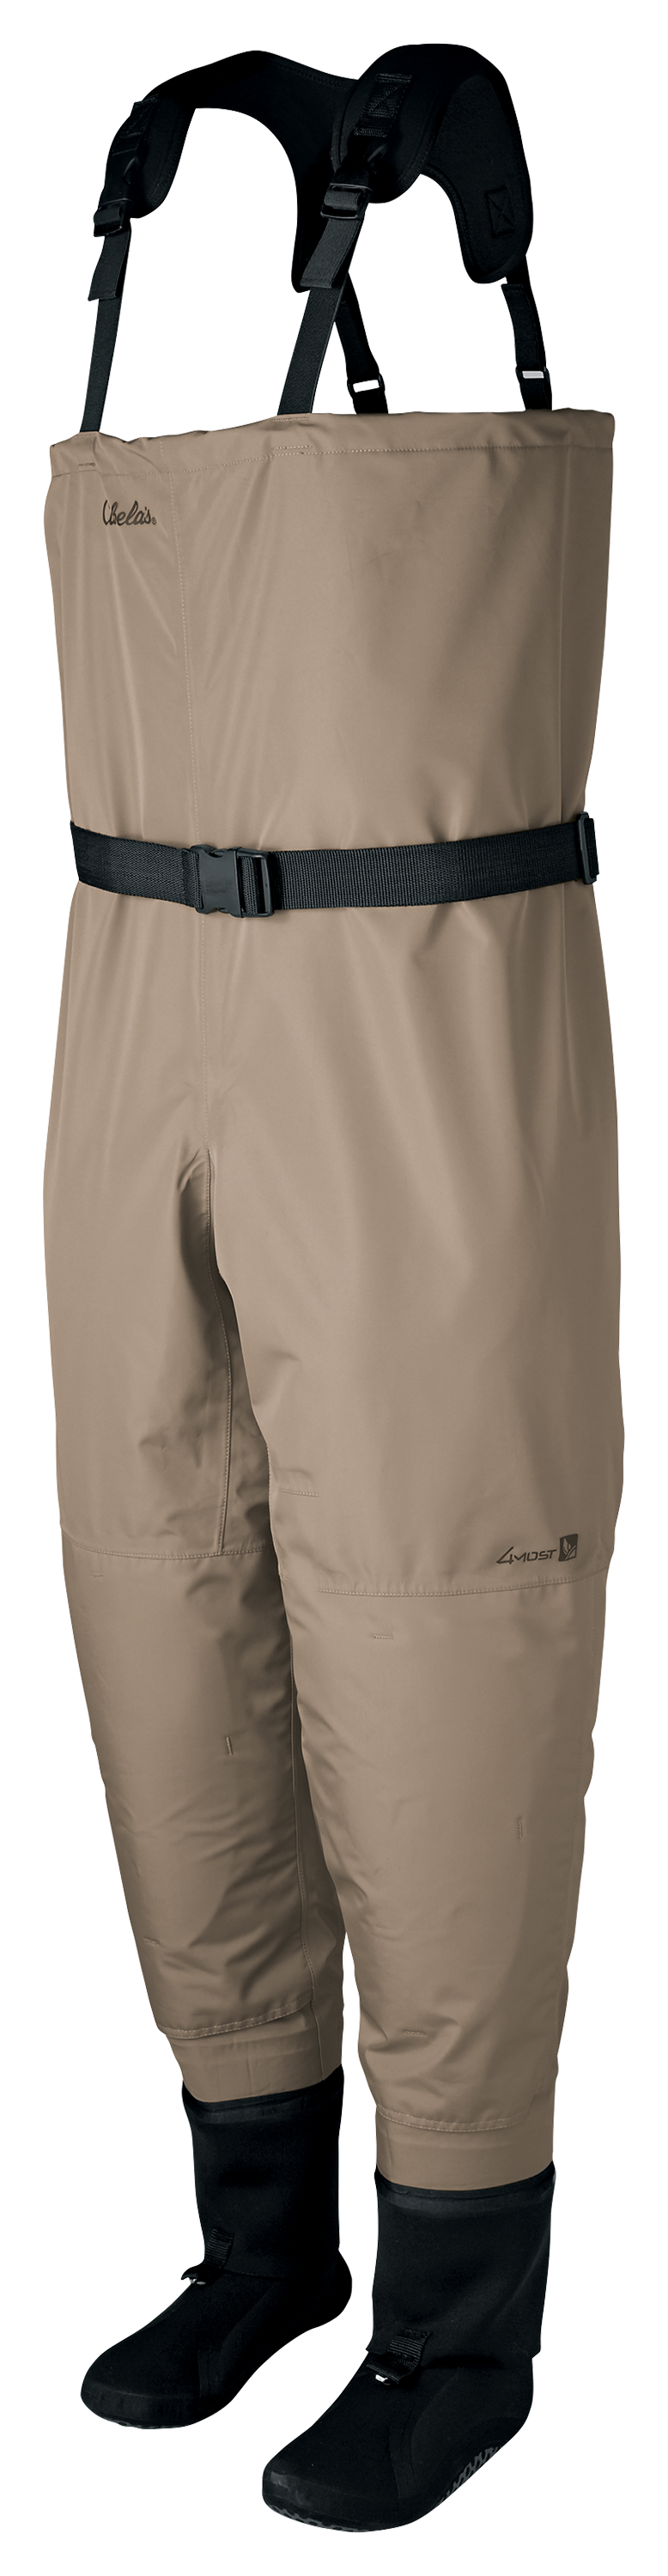 Cabela's Premium Breathable Stocking-Foot Fishing Waders for Men